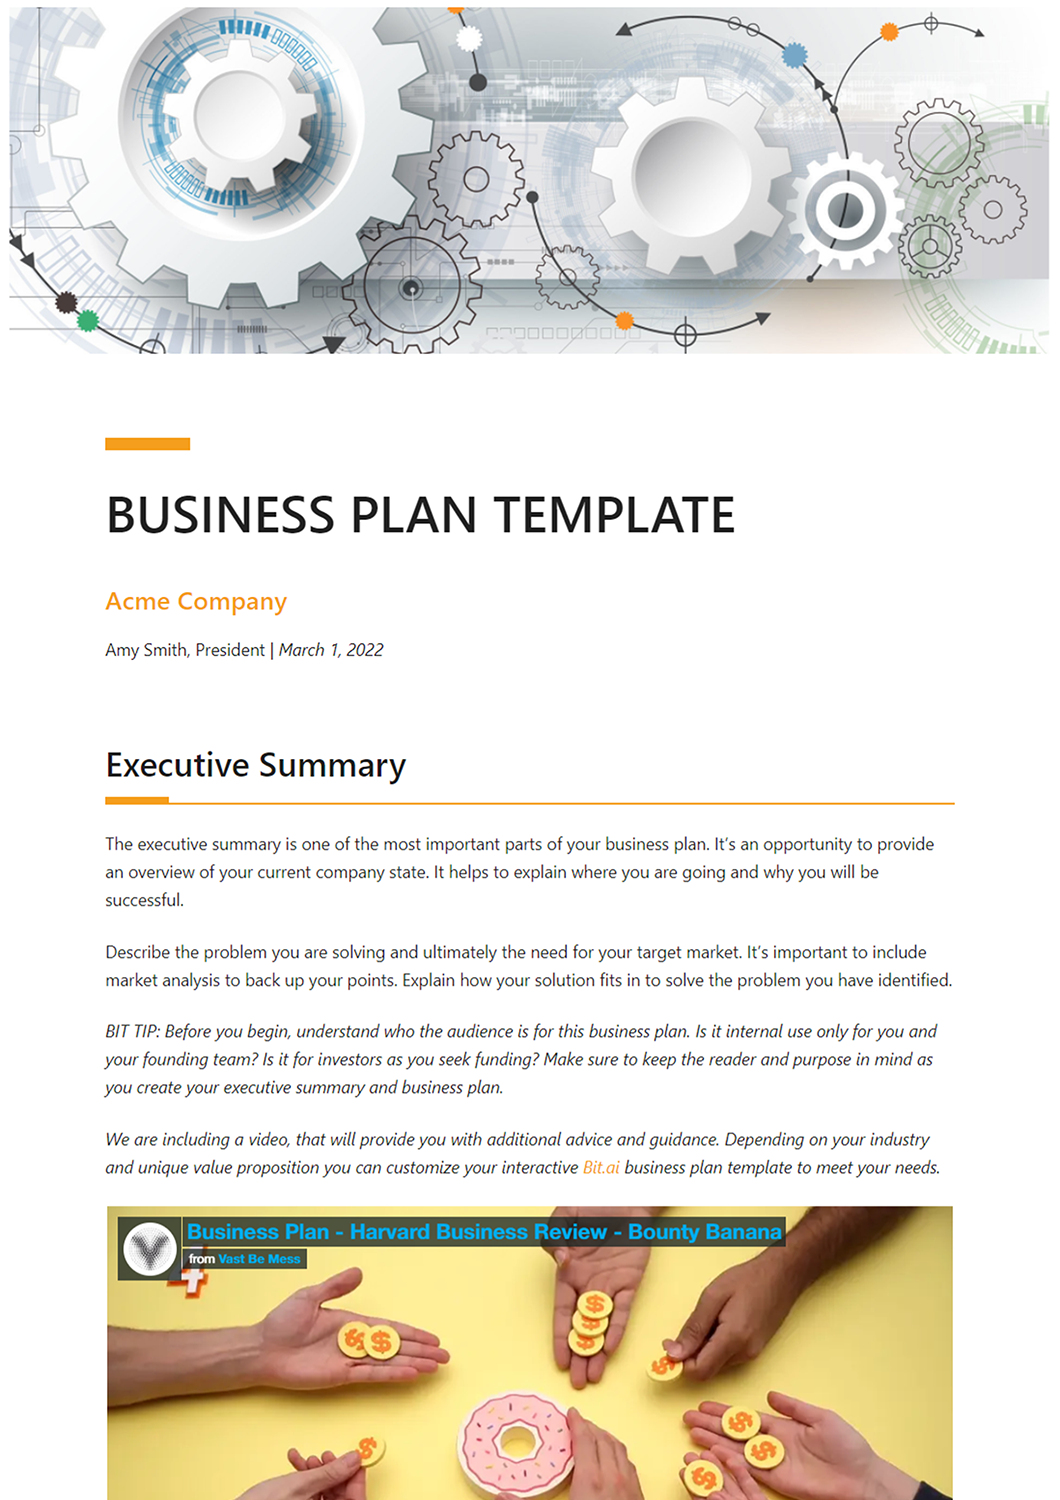 How to Make a Business Plan in Simple Steps? - Bit Blog